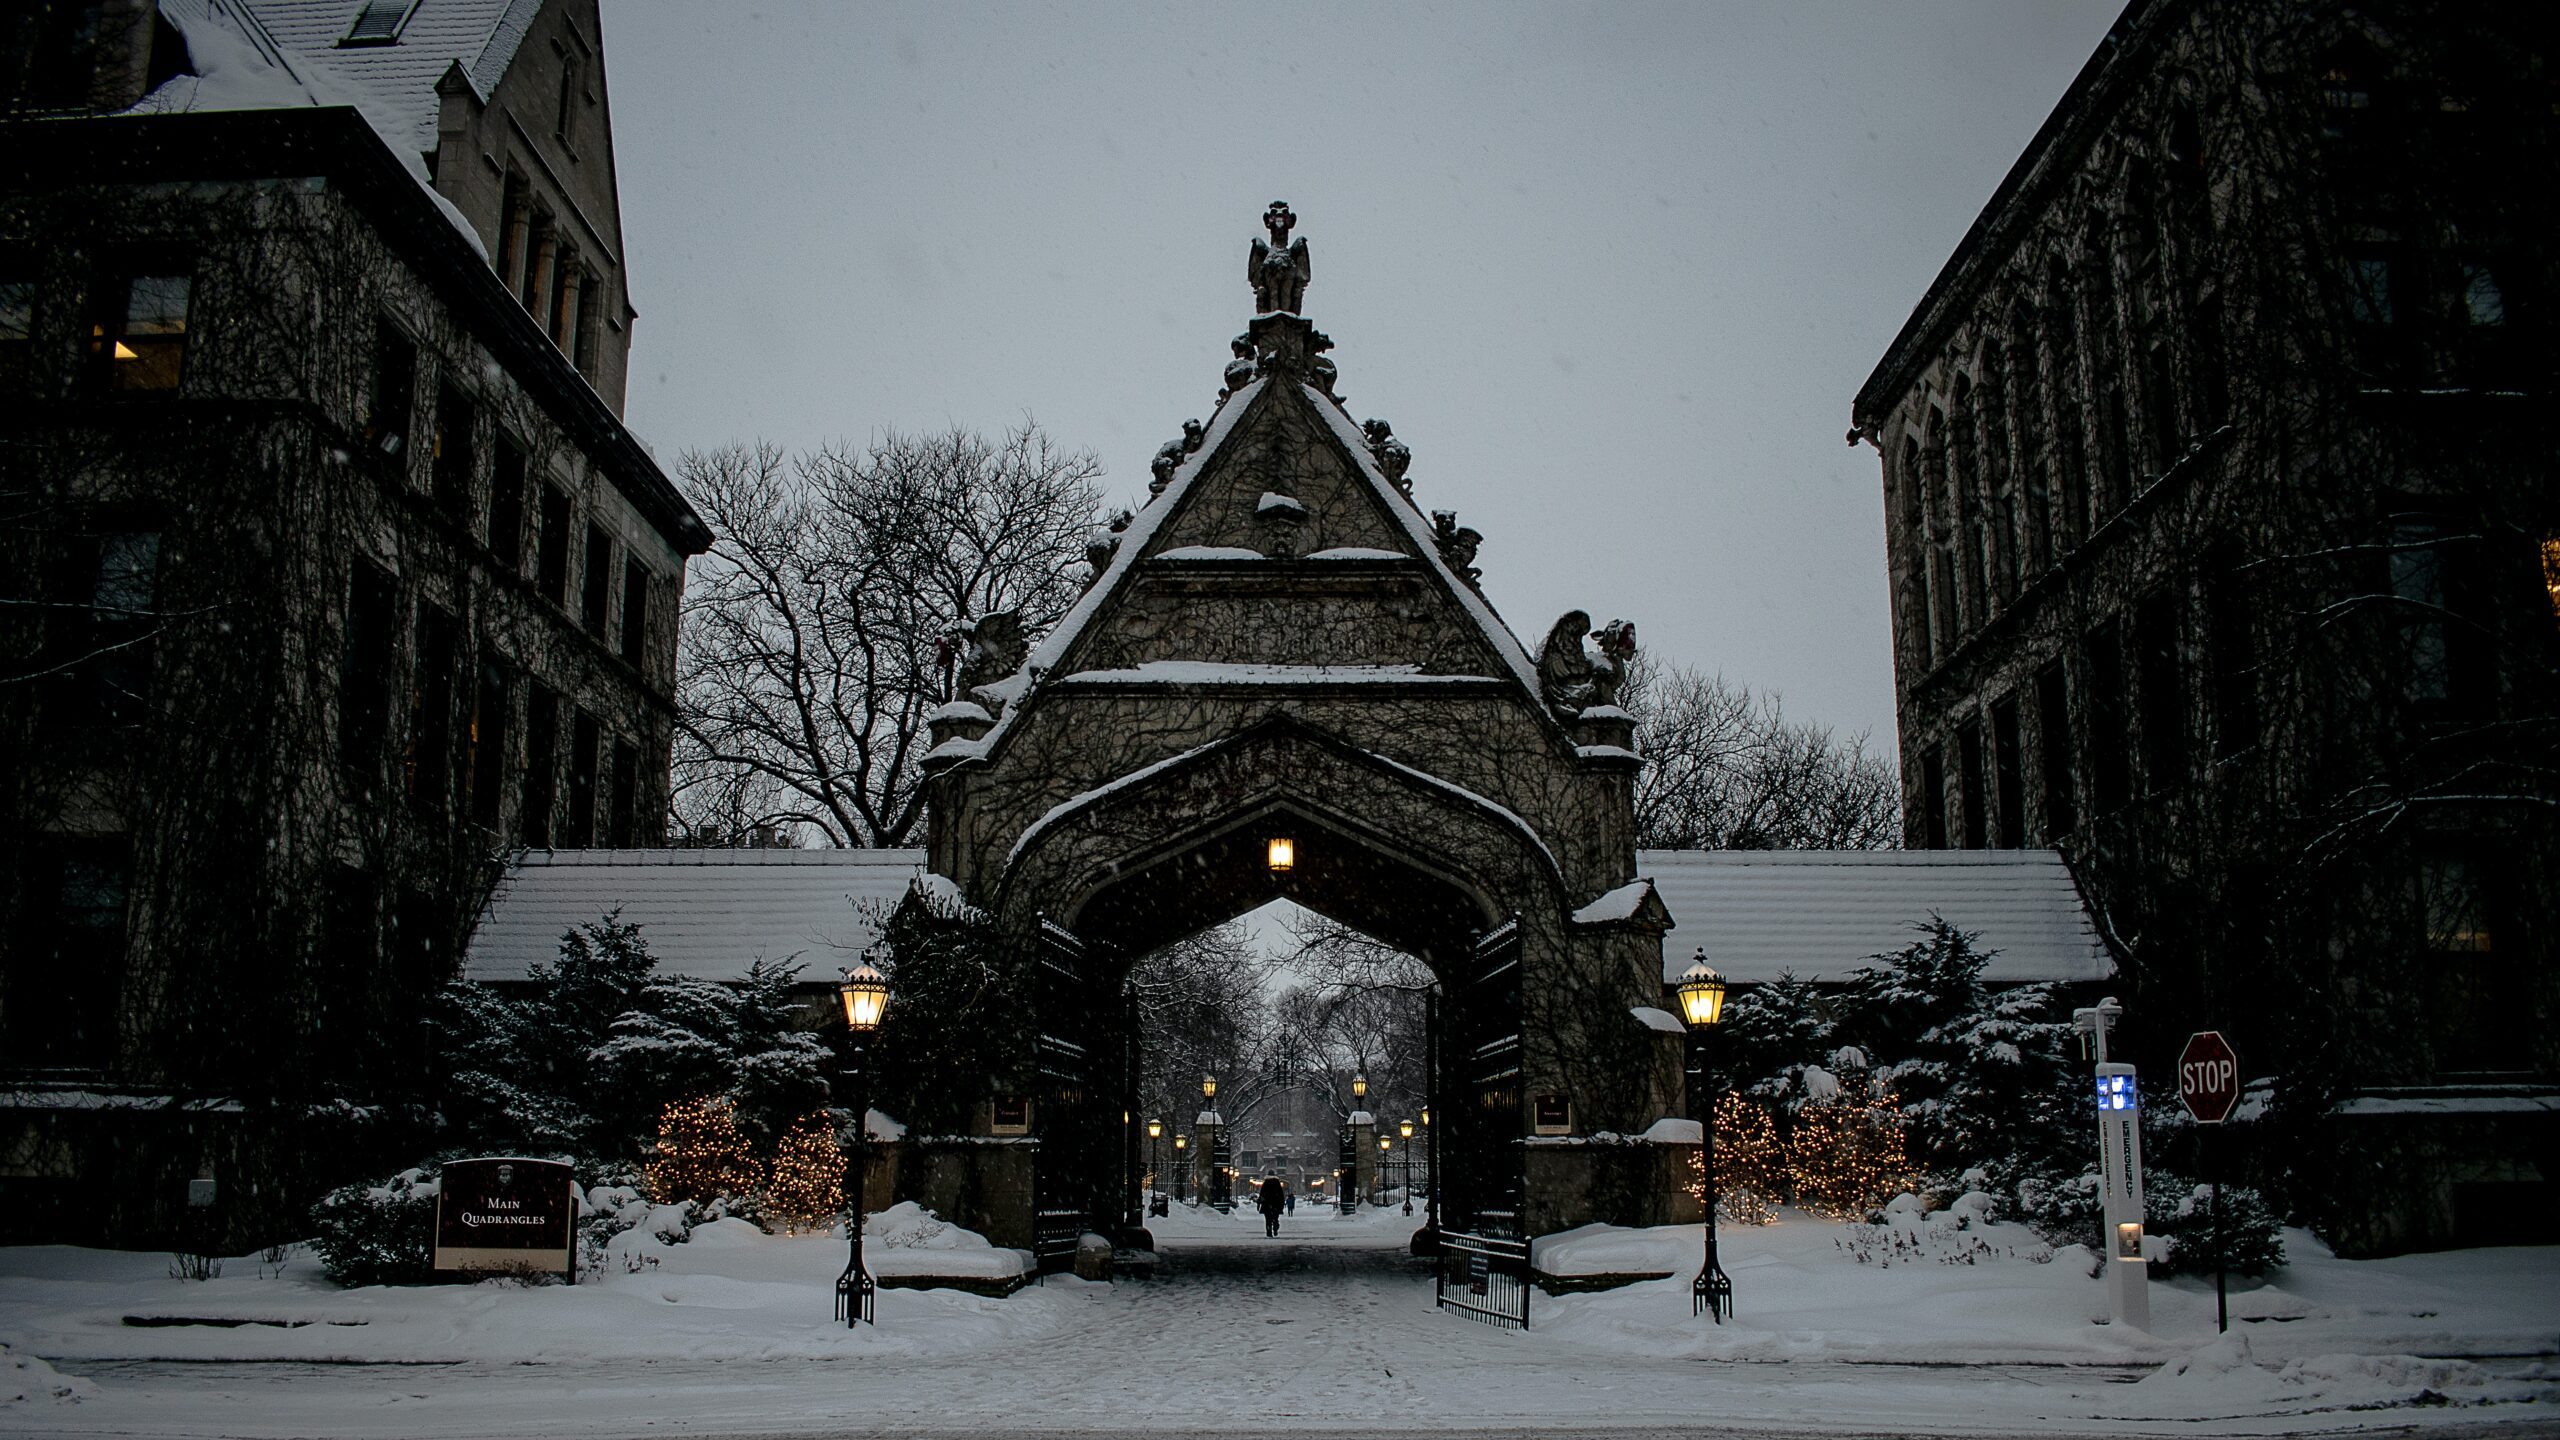 How to Get Into UChicago Guide